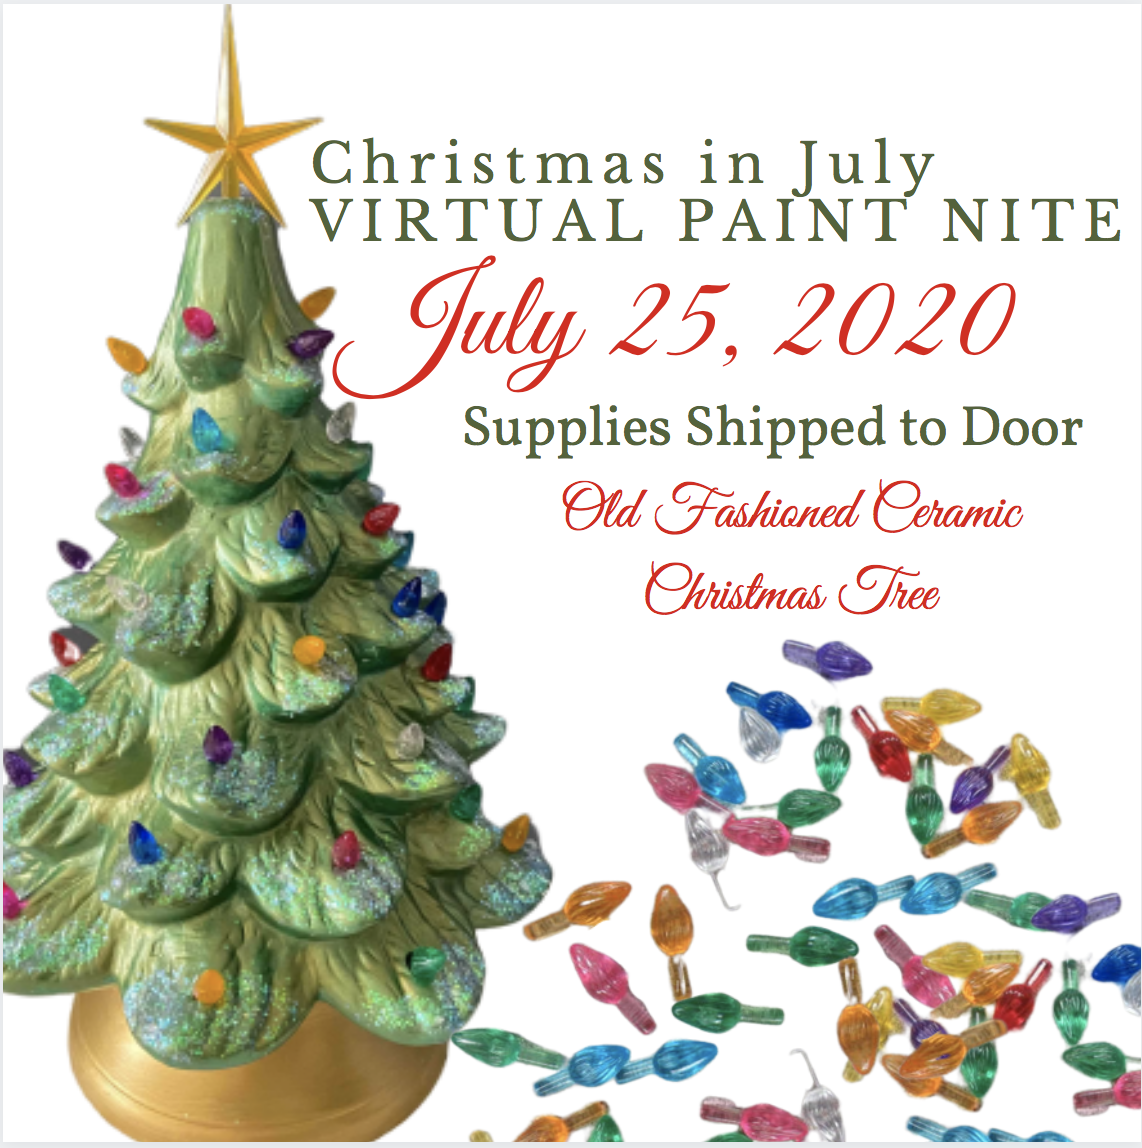 A Christmas in July Old Fashioned Ceramic Christmas Tree  Supplies Shipped to Door experience project by Yaymaker